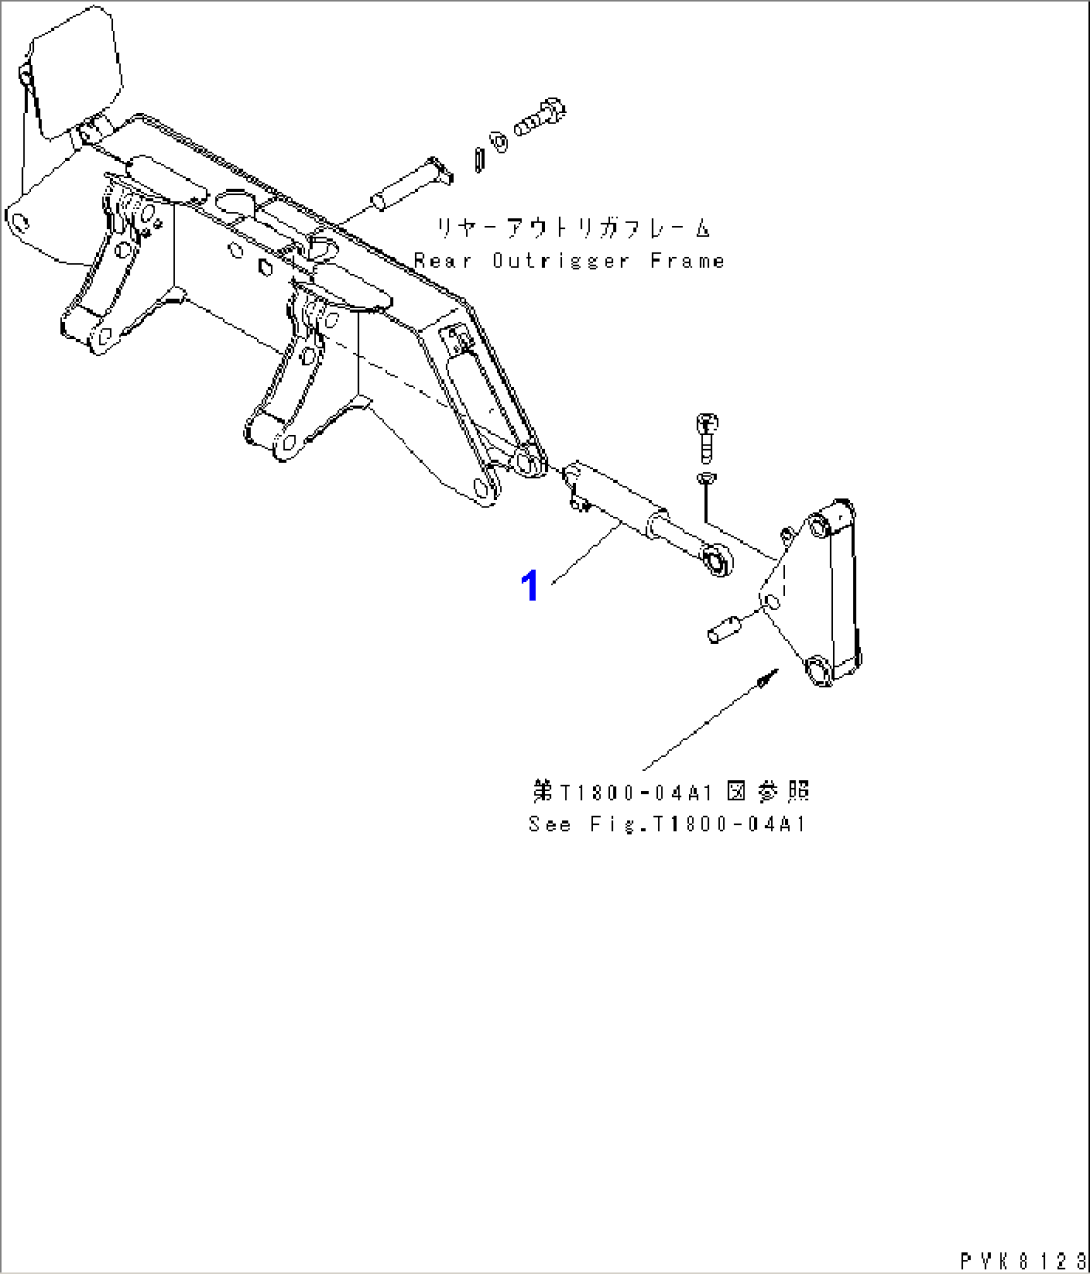 OUTRIGGER CYLINDER (FOR REAR OUTRIGGER)